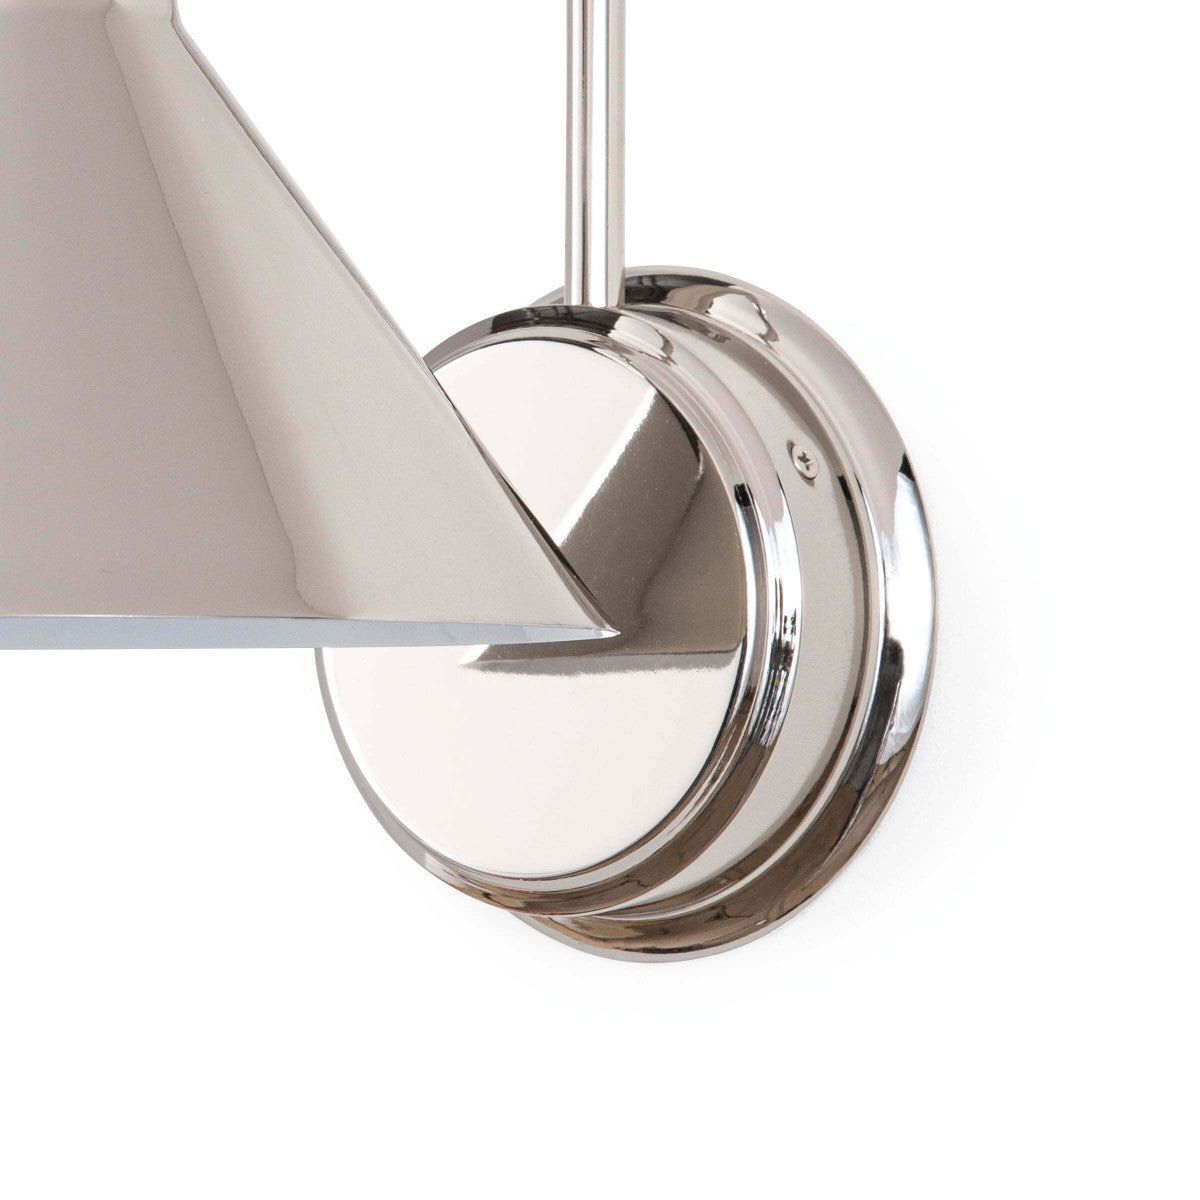 This Dublin Polished Nickel Sconce has clean lines, creating a modern industrial look. These are the perfect sophisticated touch for any bedroom, kitchen, or hallway  Size: 7.75"w x 11"d x 13"h Material: Steel